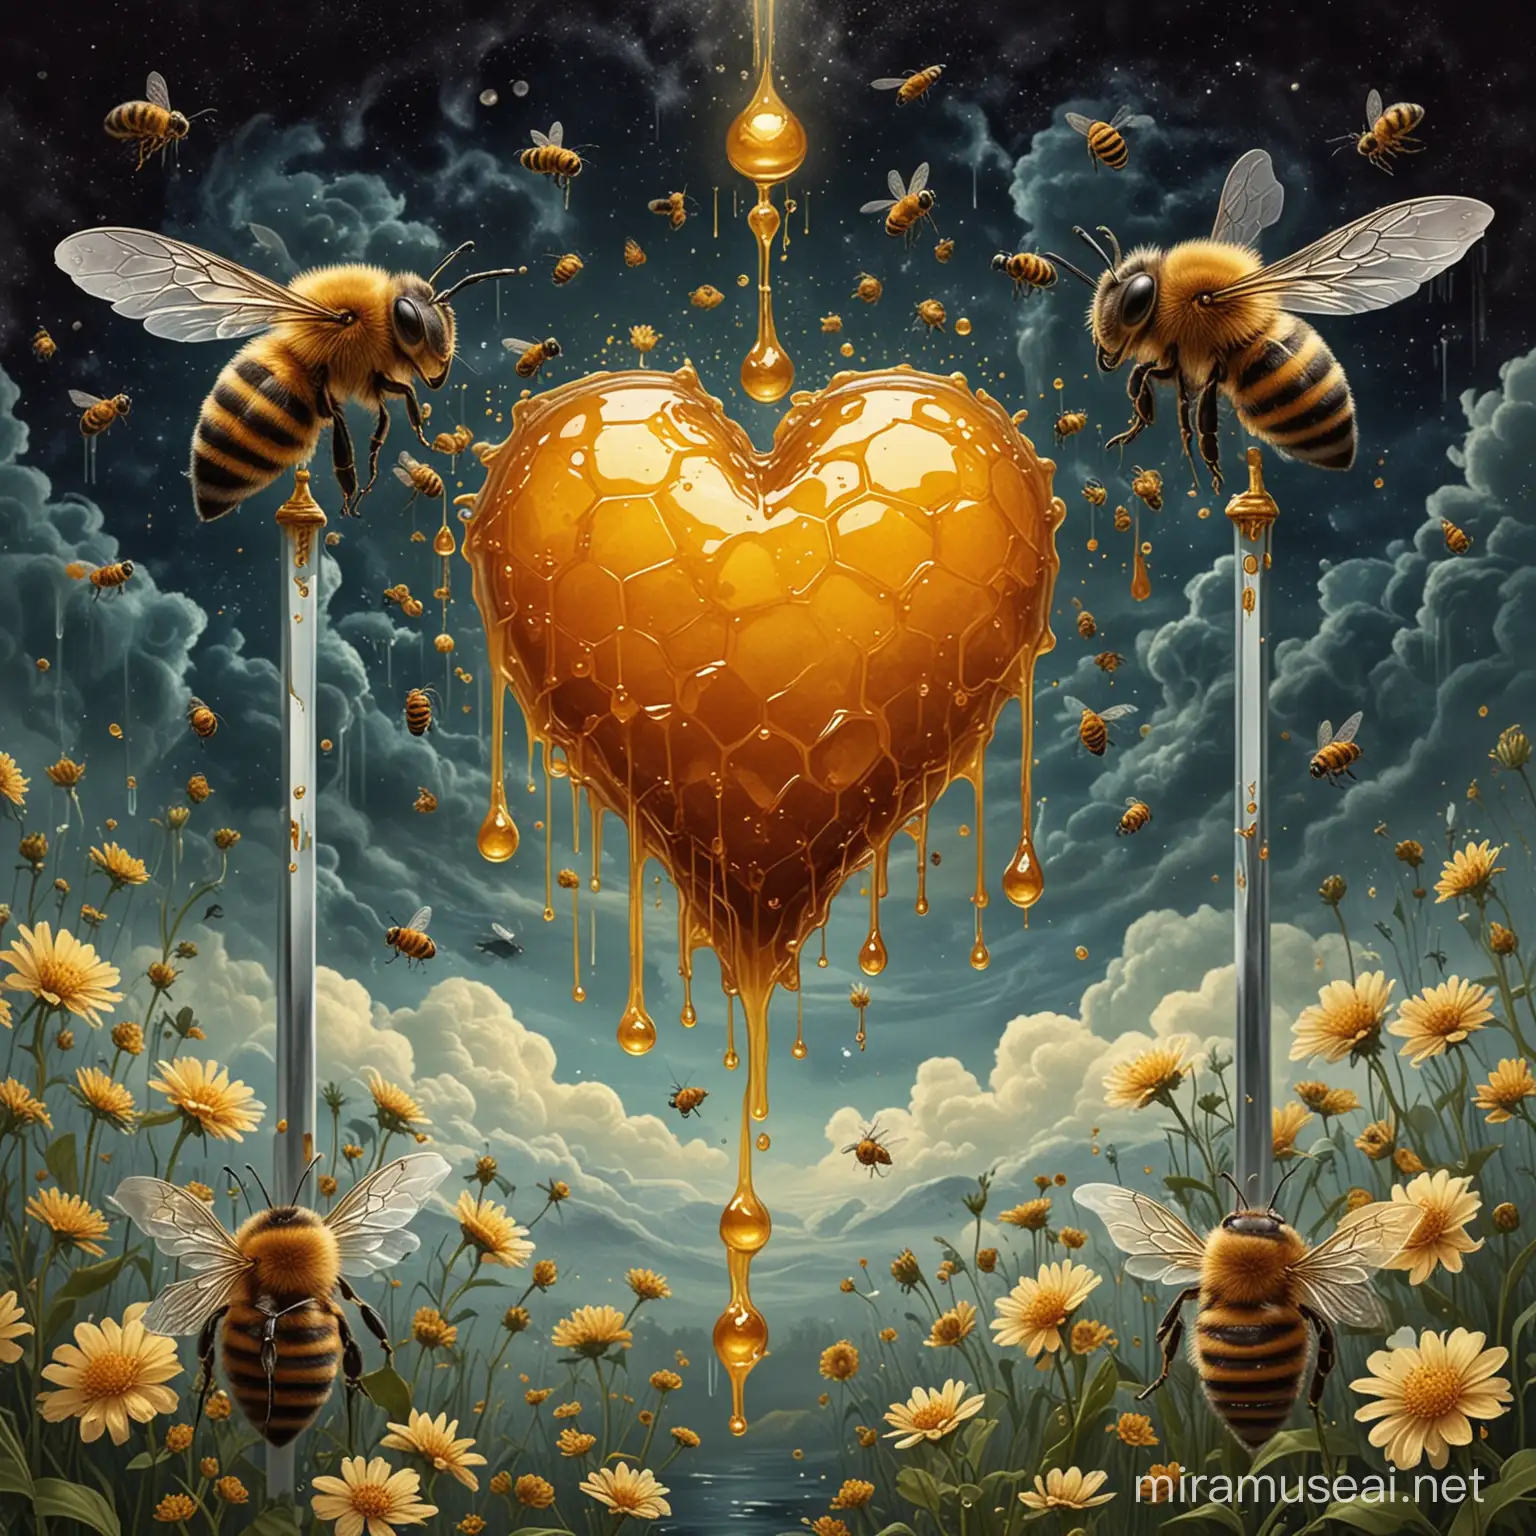 Create a 3 of Swords tarot card that has a beehive shapped heart drippoing honey with 1 sword piercing through the top left, 1 sword piercing the top middle, and 1 sword piercing through the top right. Floating around the heart are 3 honeybees with sharp stingers are the swords. The background is a dark cosmic portal with honeybees swarming. The 3 swords are designed like bee covered by dripping honey.